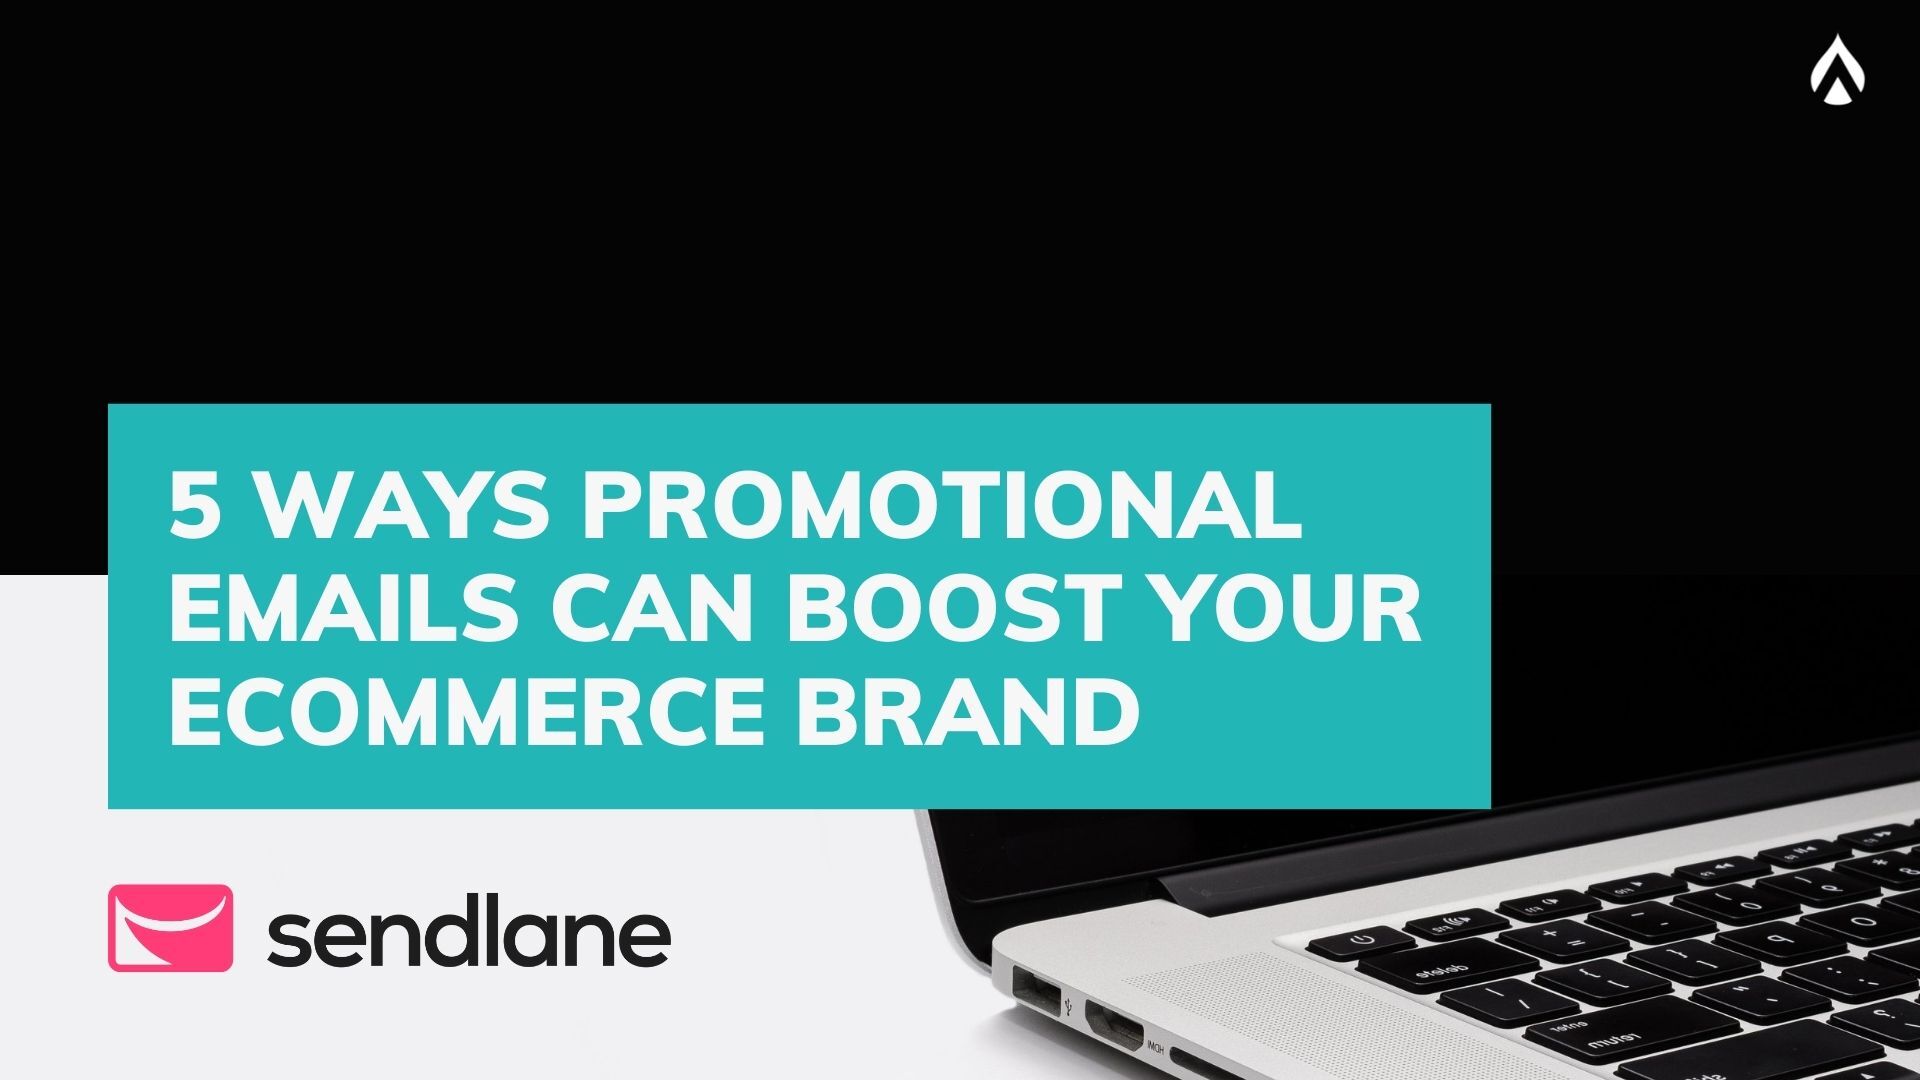 5 ways promotional emails can boost your ecommerce brand